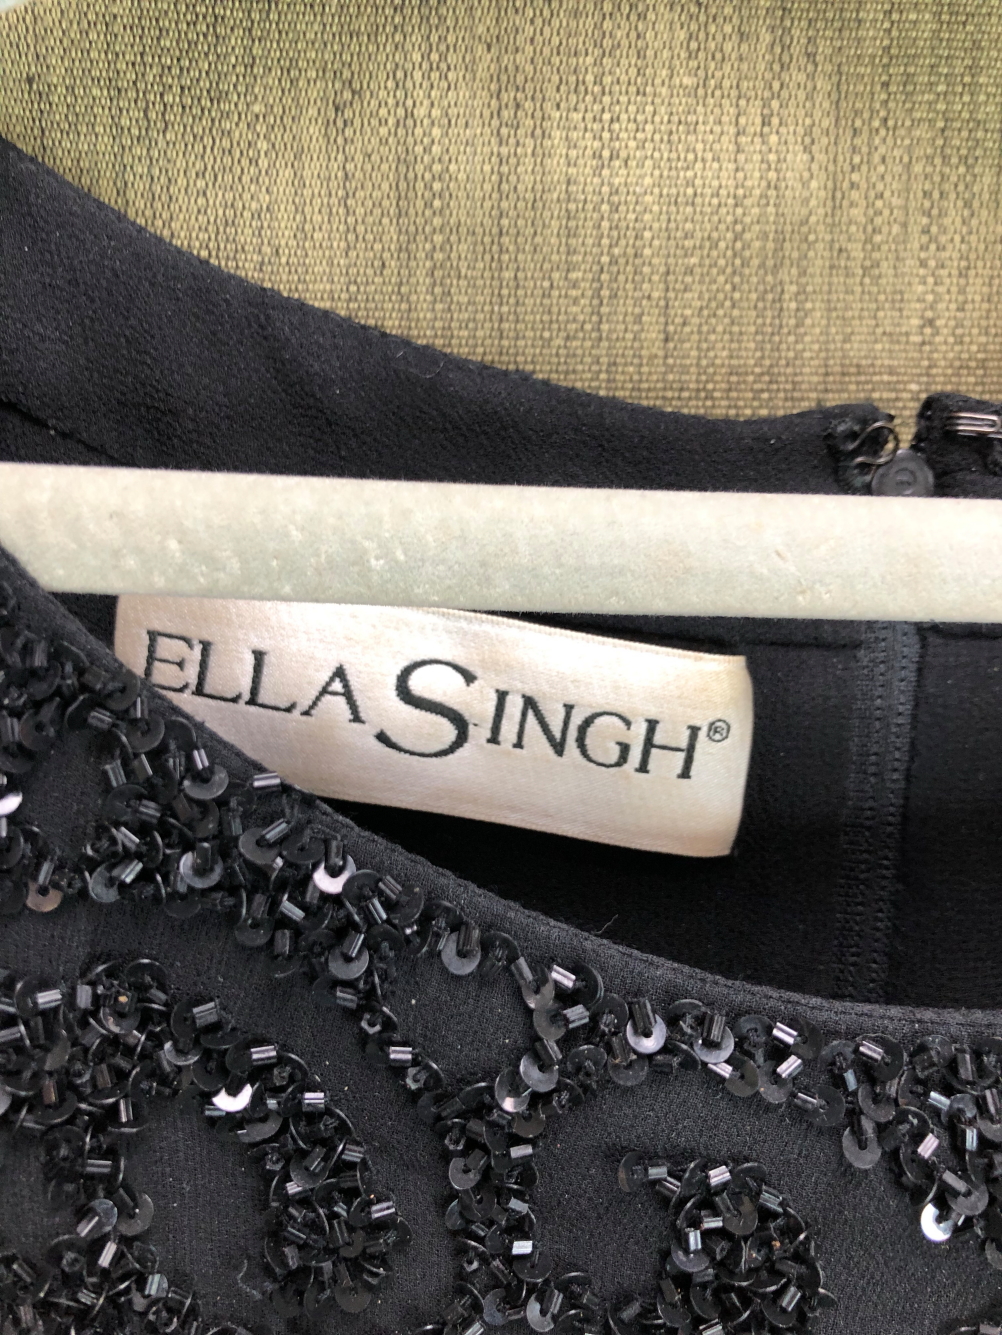 A ELLA SINGH BLACK SEQUIN JACKET SIZE 42 AND MATCHING VEST TOP SIZE 40 - Image 3 of 7